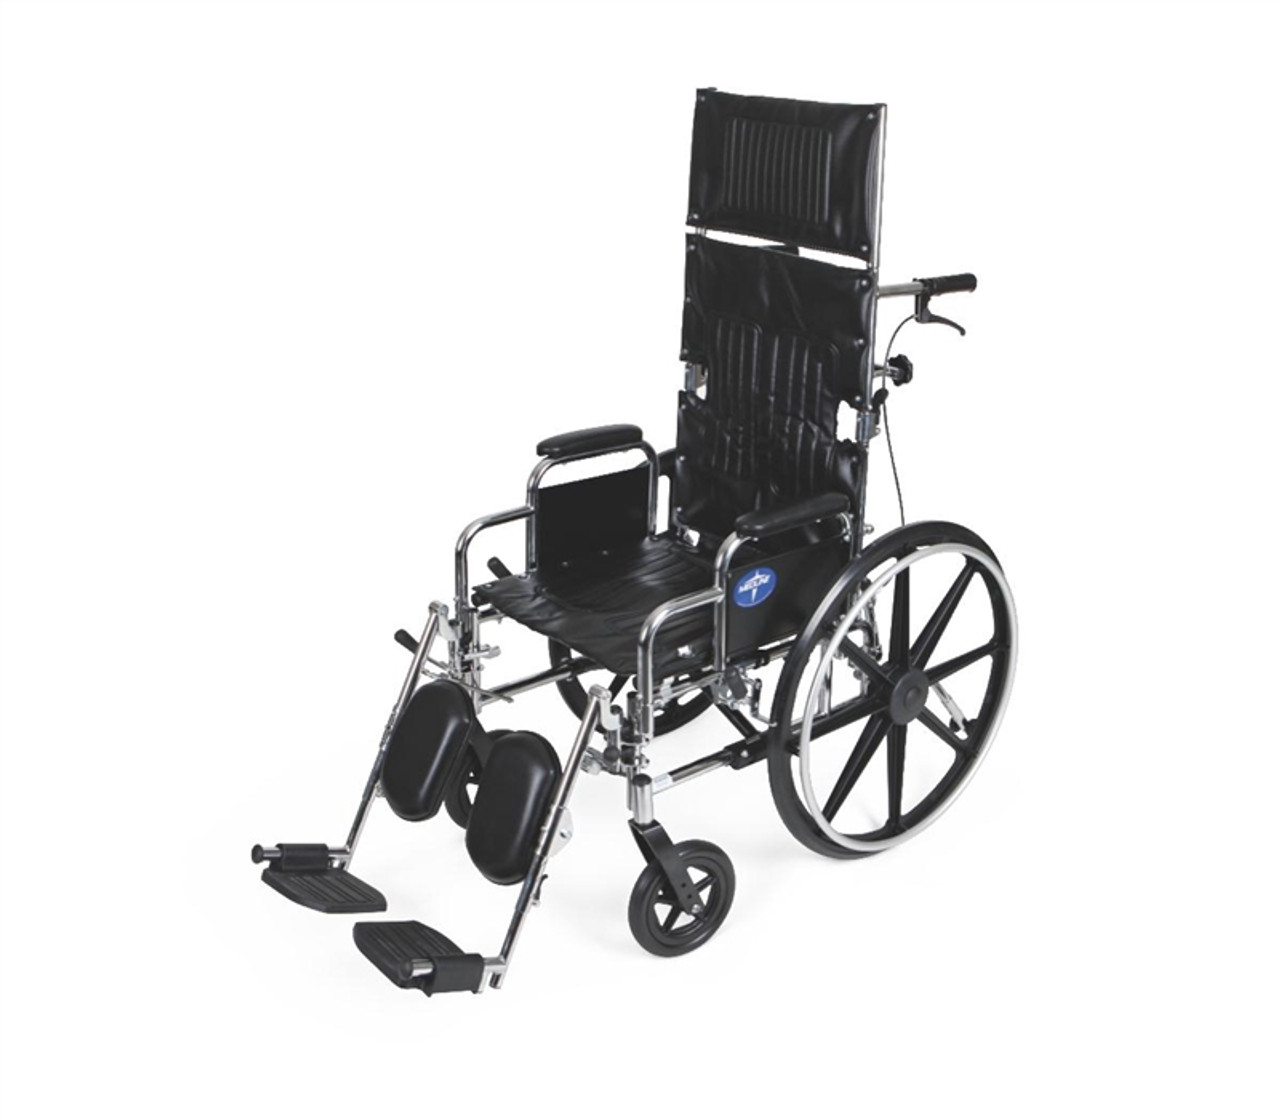 Drive Medical Accessories for Sentra Full Reclining Wheelchair